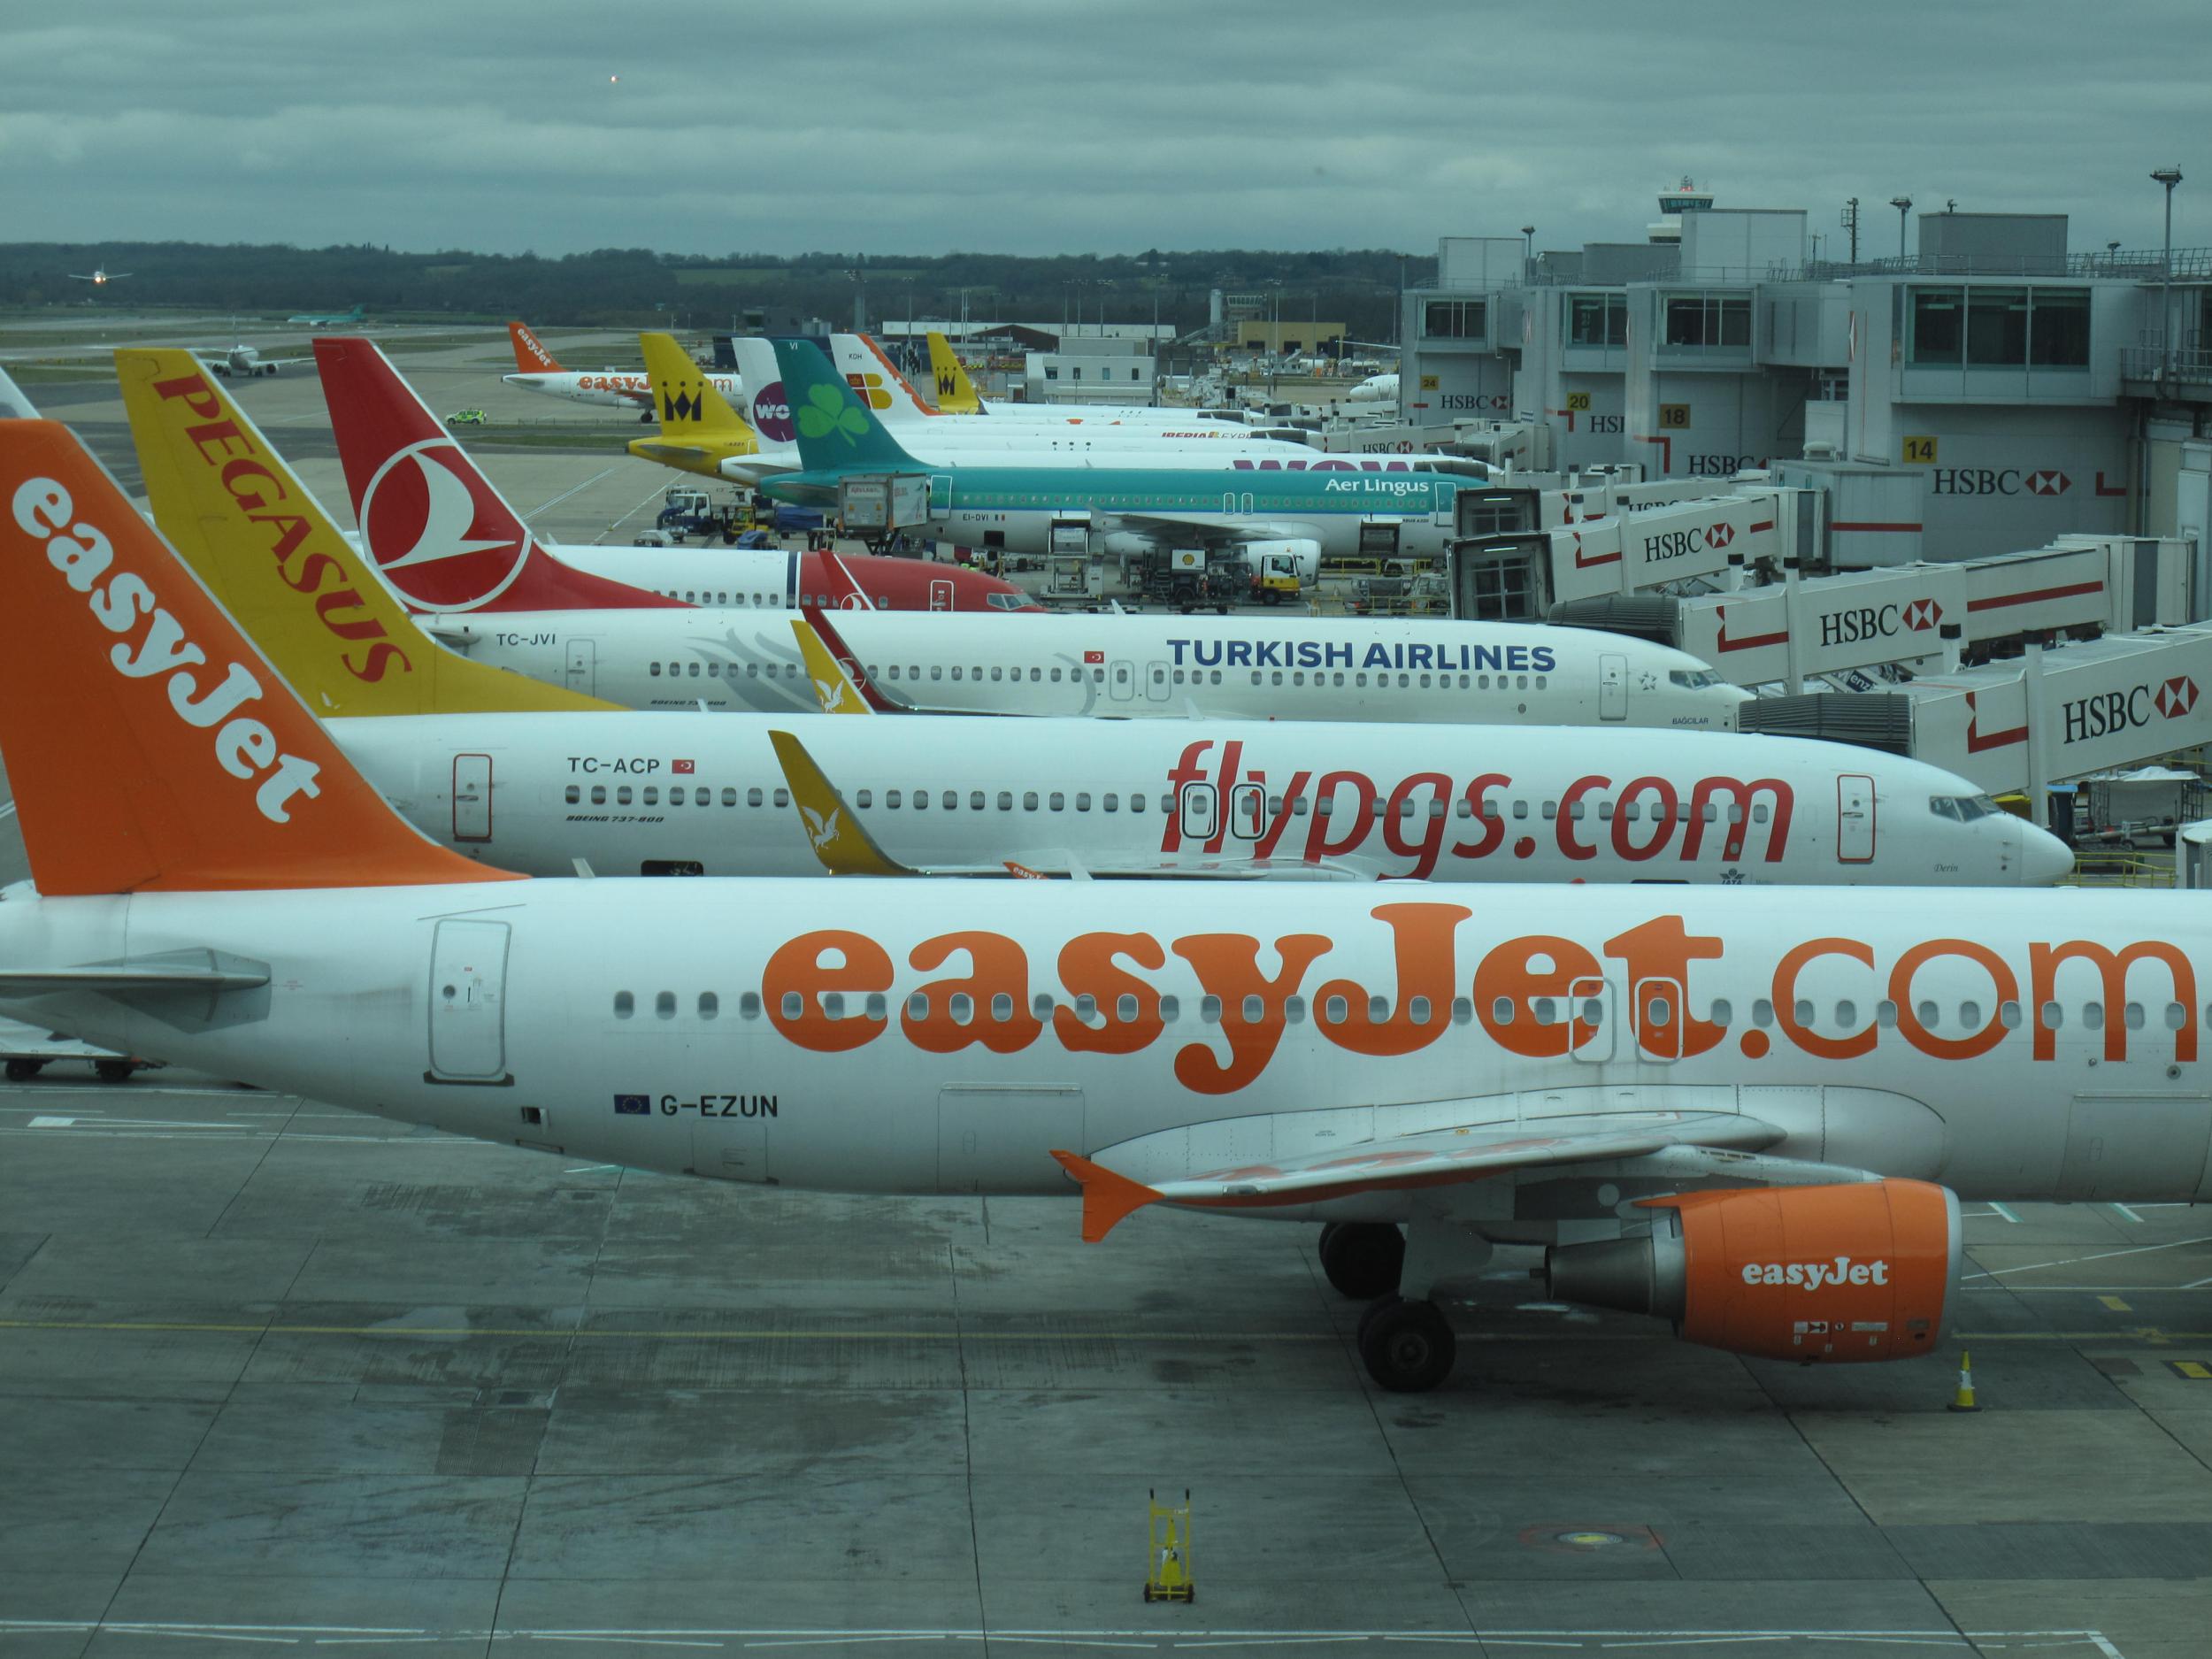 File photo showing planes at Gatwick airport